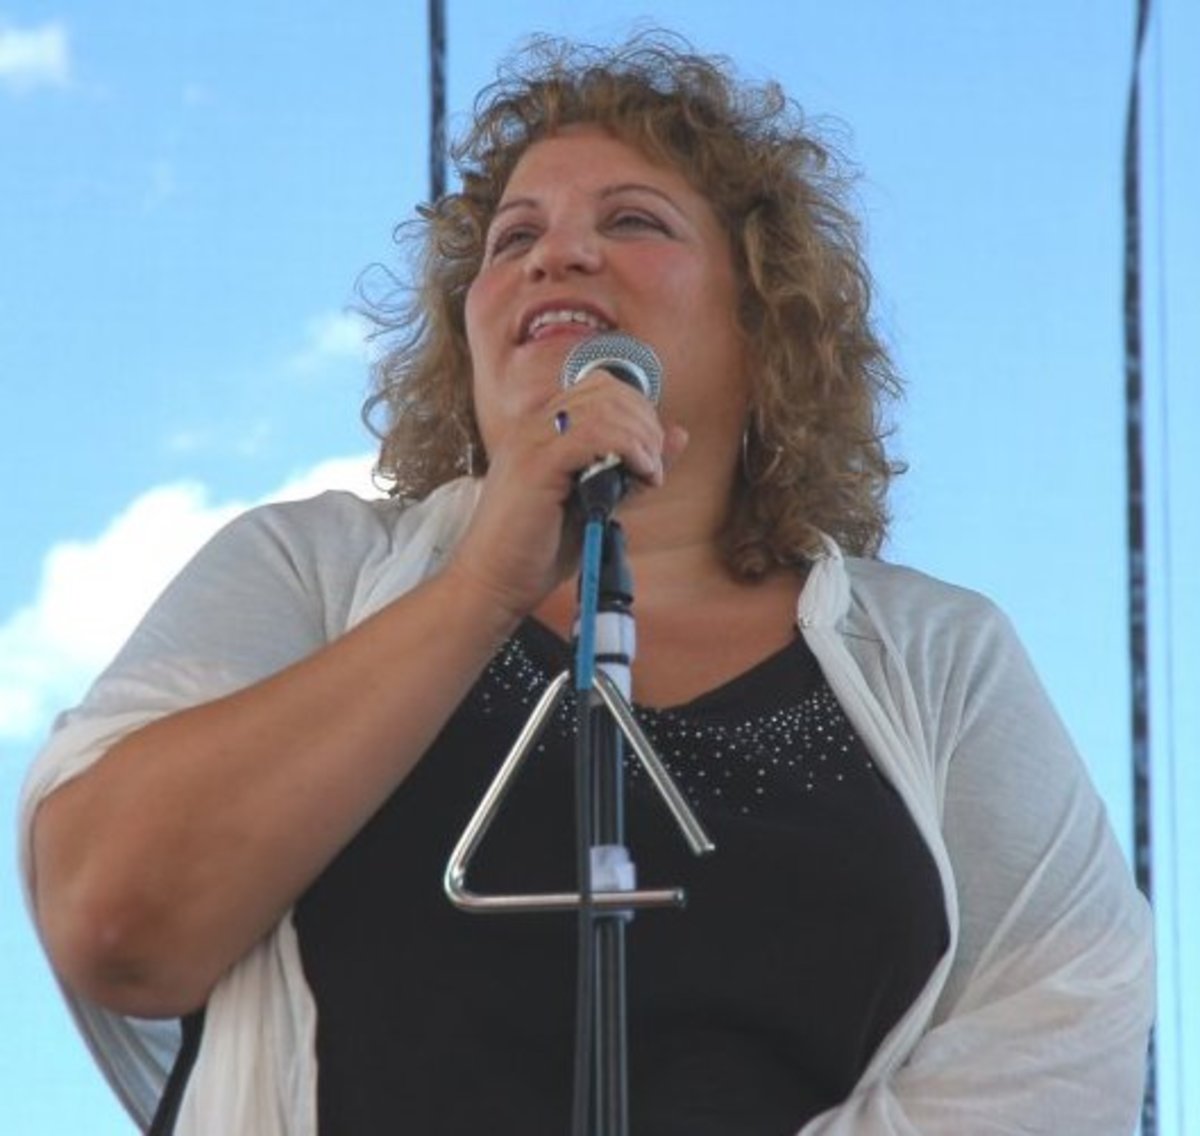 Singing at the state fair